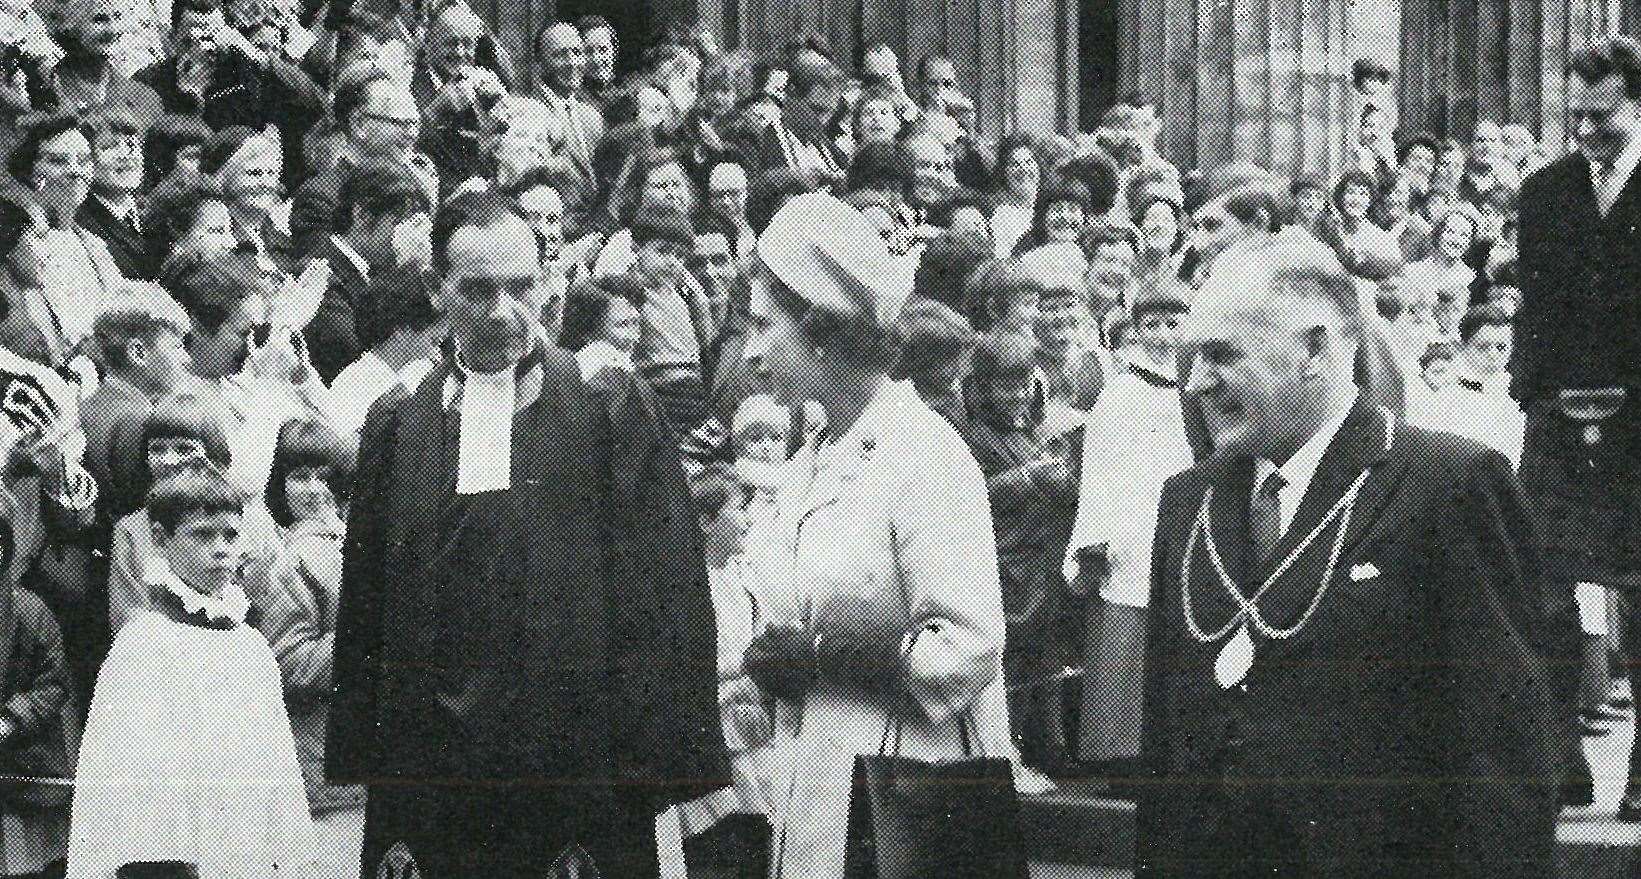 The service over, the Queen has a parting word with Reverend R J Henderson, who was known for his forthright views. Not long afterwards, the minister sparked national – and even international – comment after he said a 'Thank God for Whisky' prayer during a televised service at St Giles.